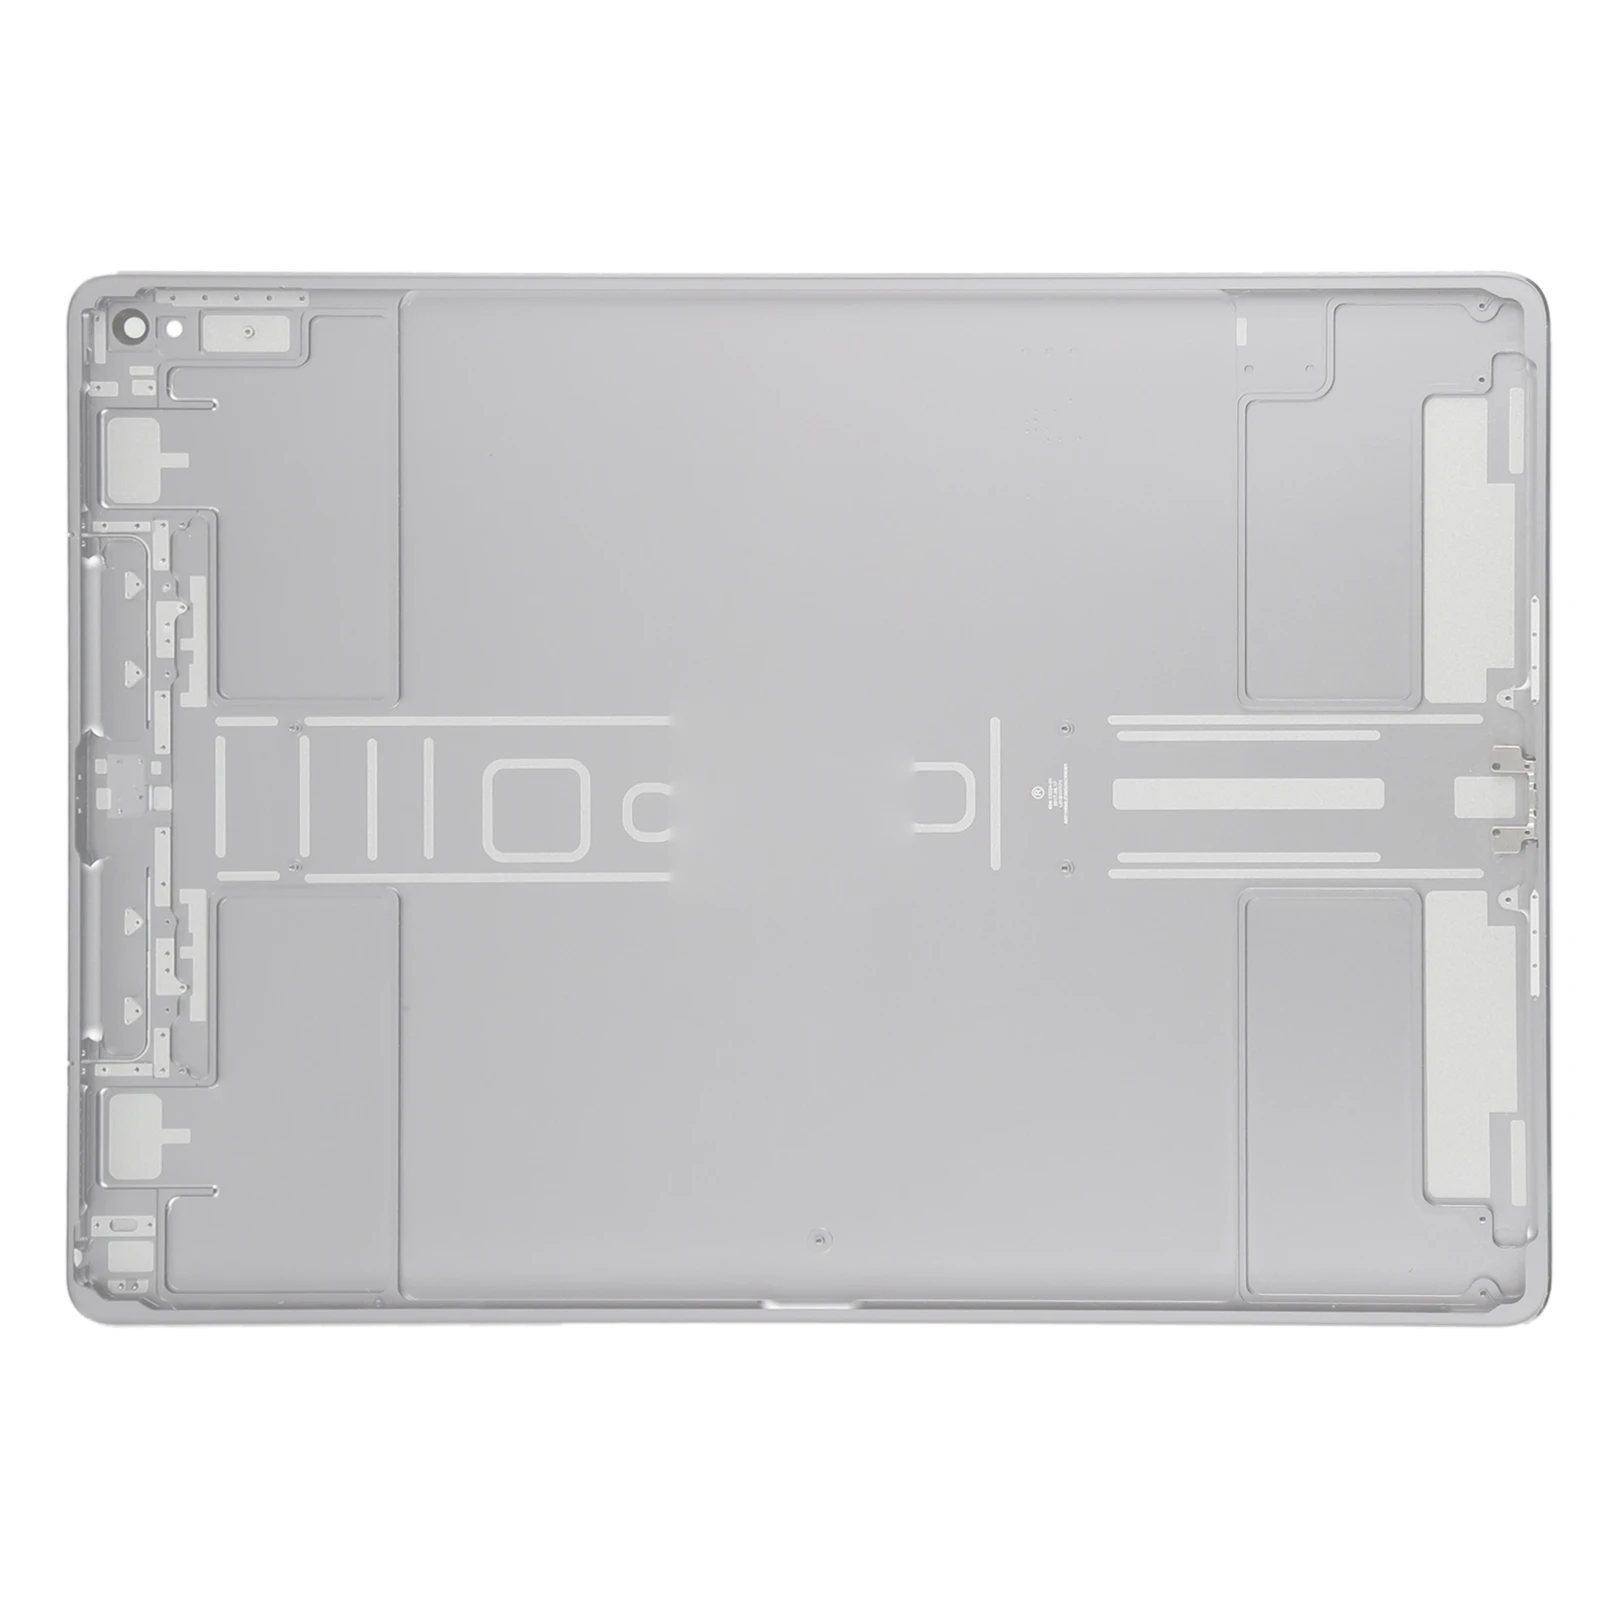 12.9 inch Battery Housing Door Case For iPad Pro A1652 A1584 A1670 A1671 Rear Housing Battery Cover WiFi / 4G Version Back Cover enlarge